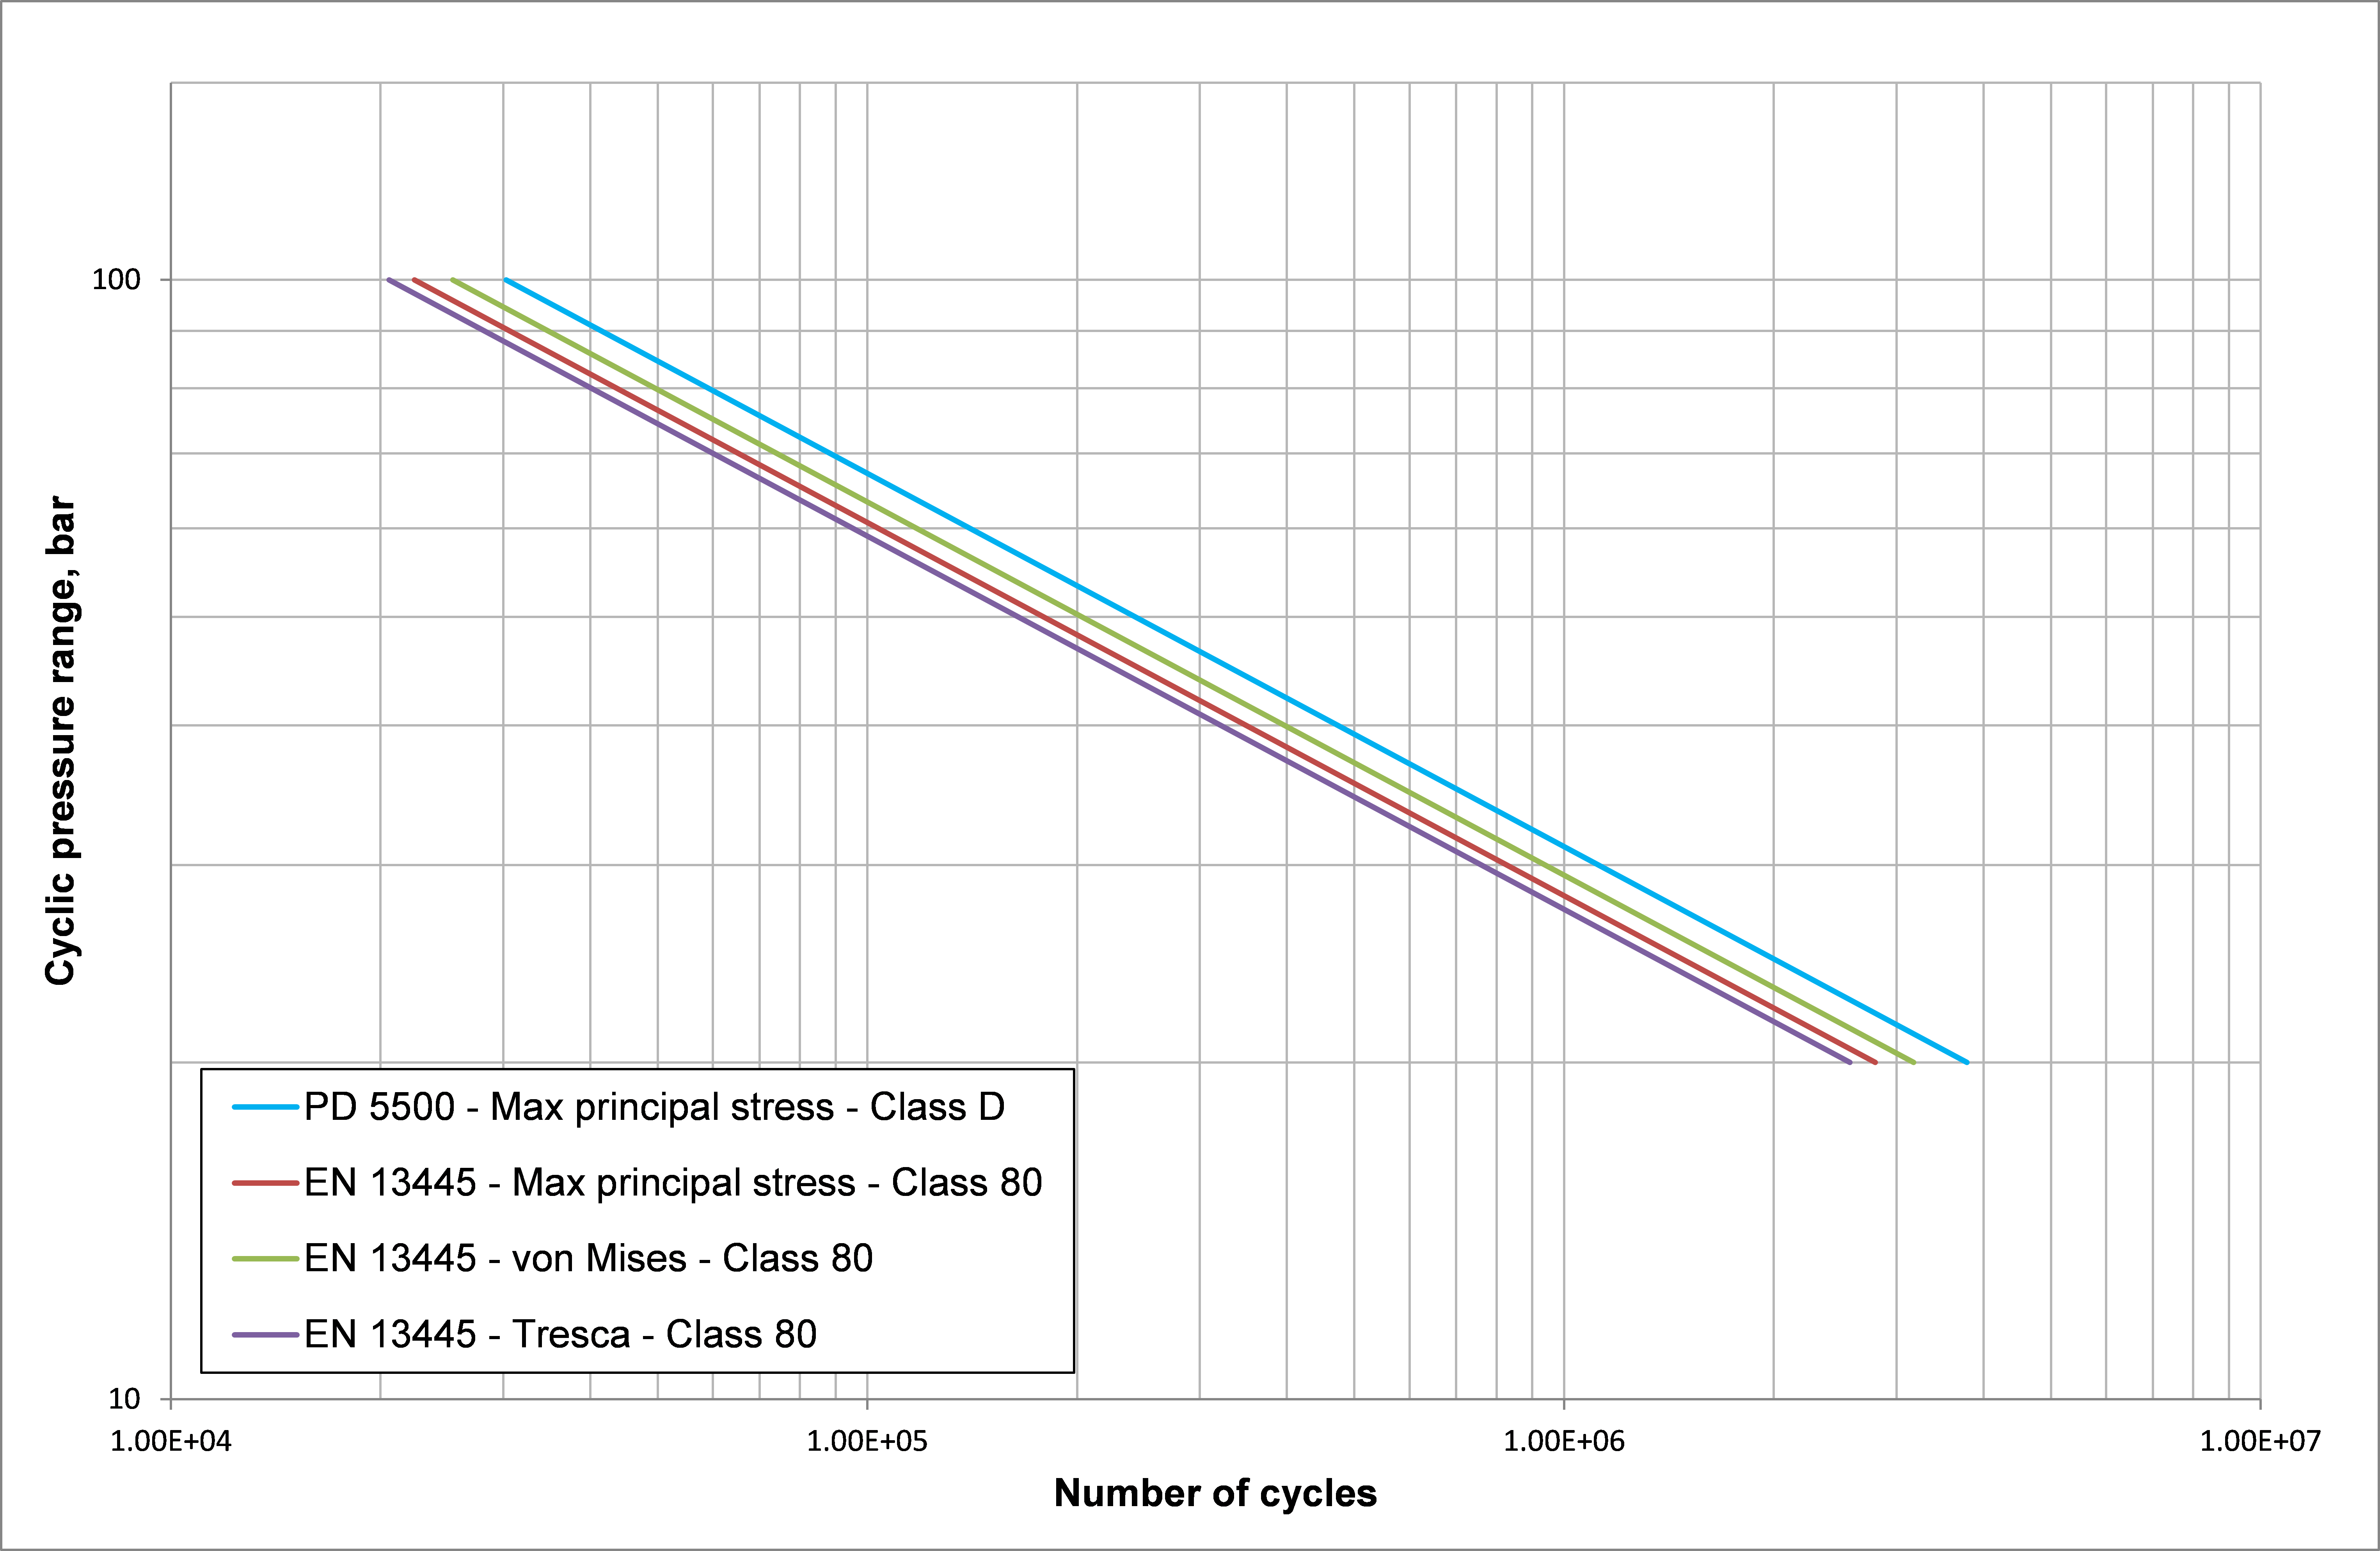 Figure 6 Comparison of PD 5500 and EB 13445 – Knuckle weld.